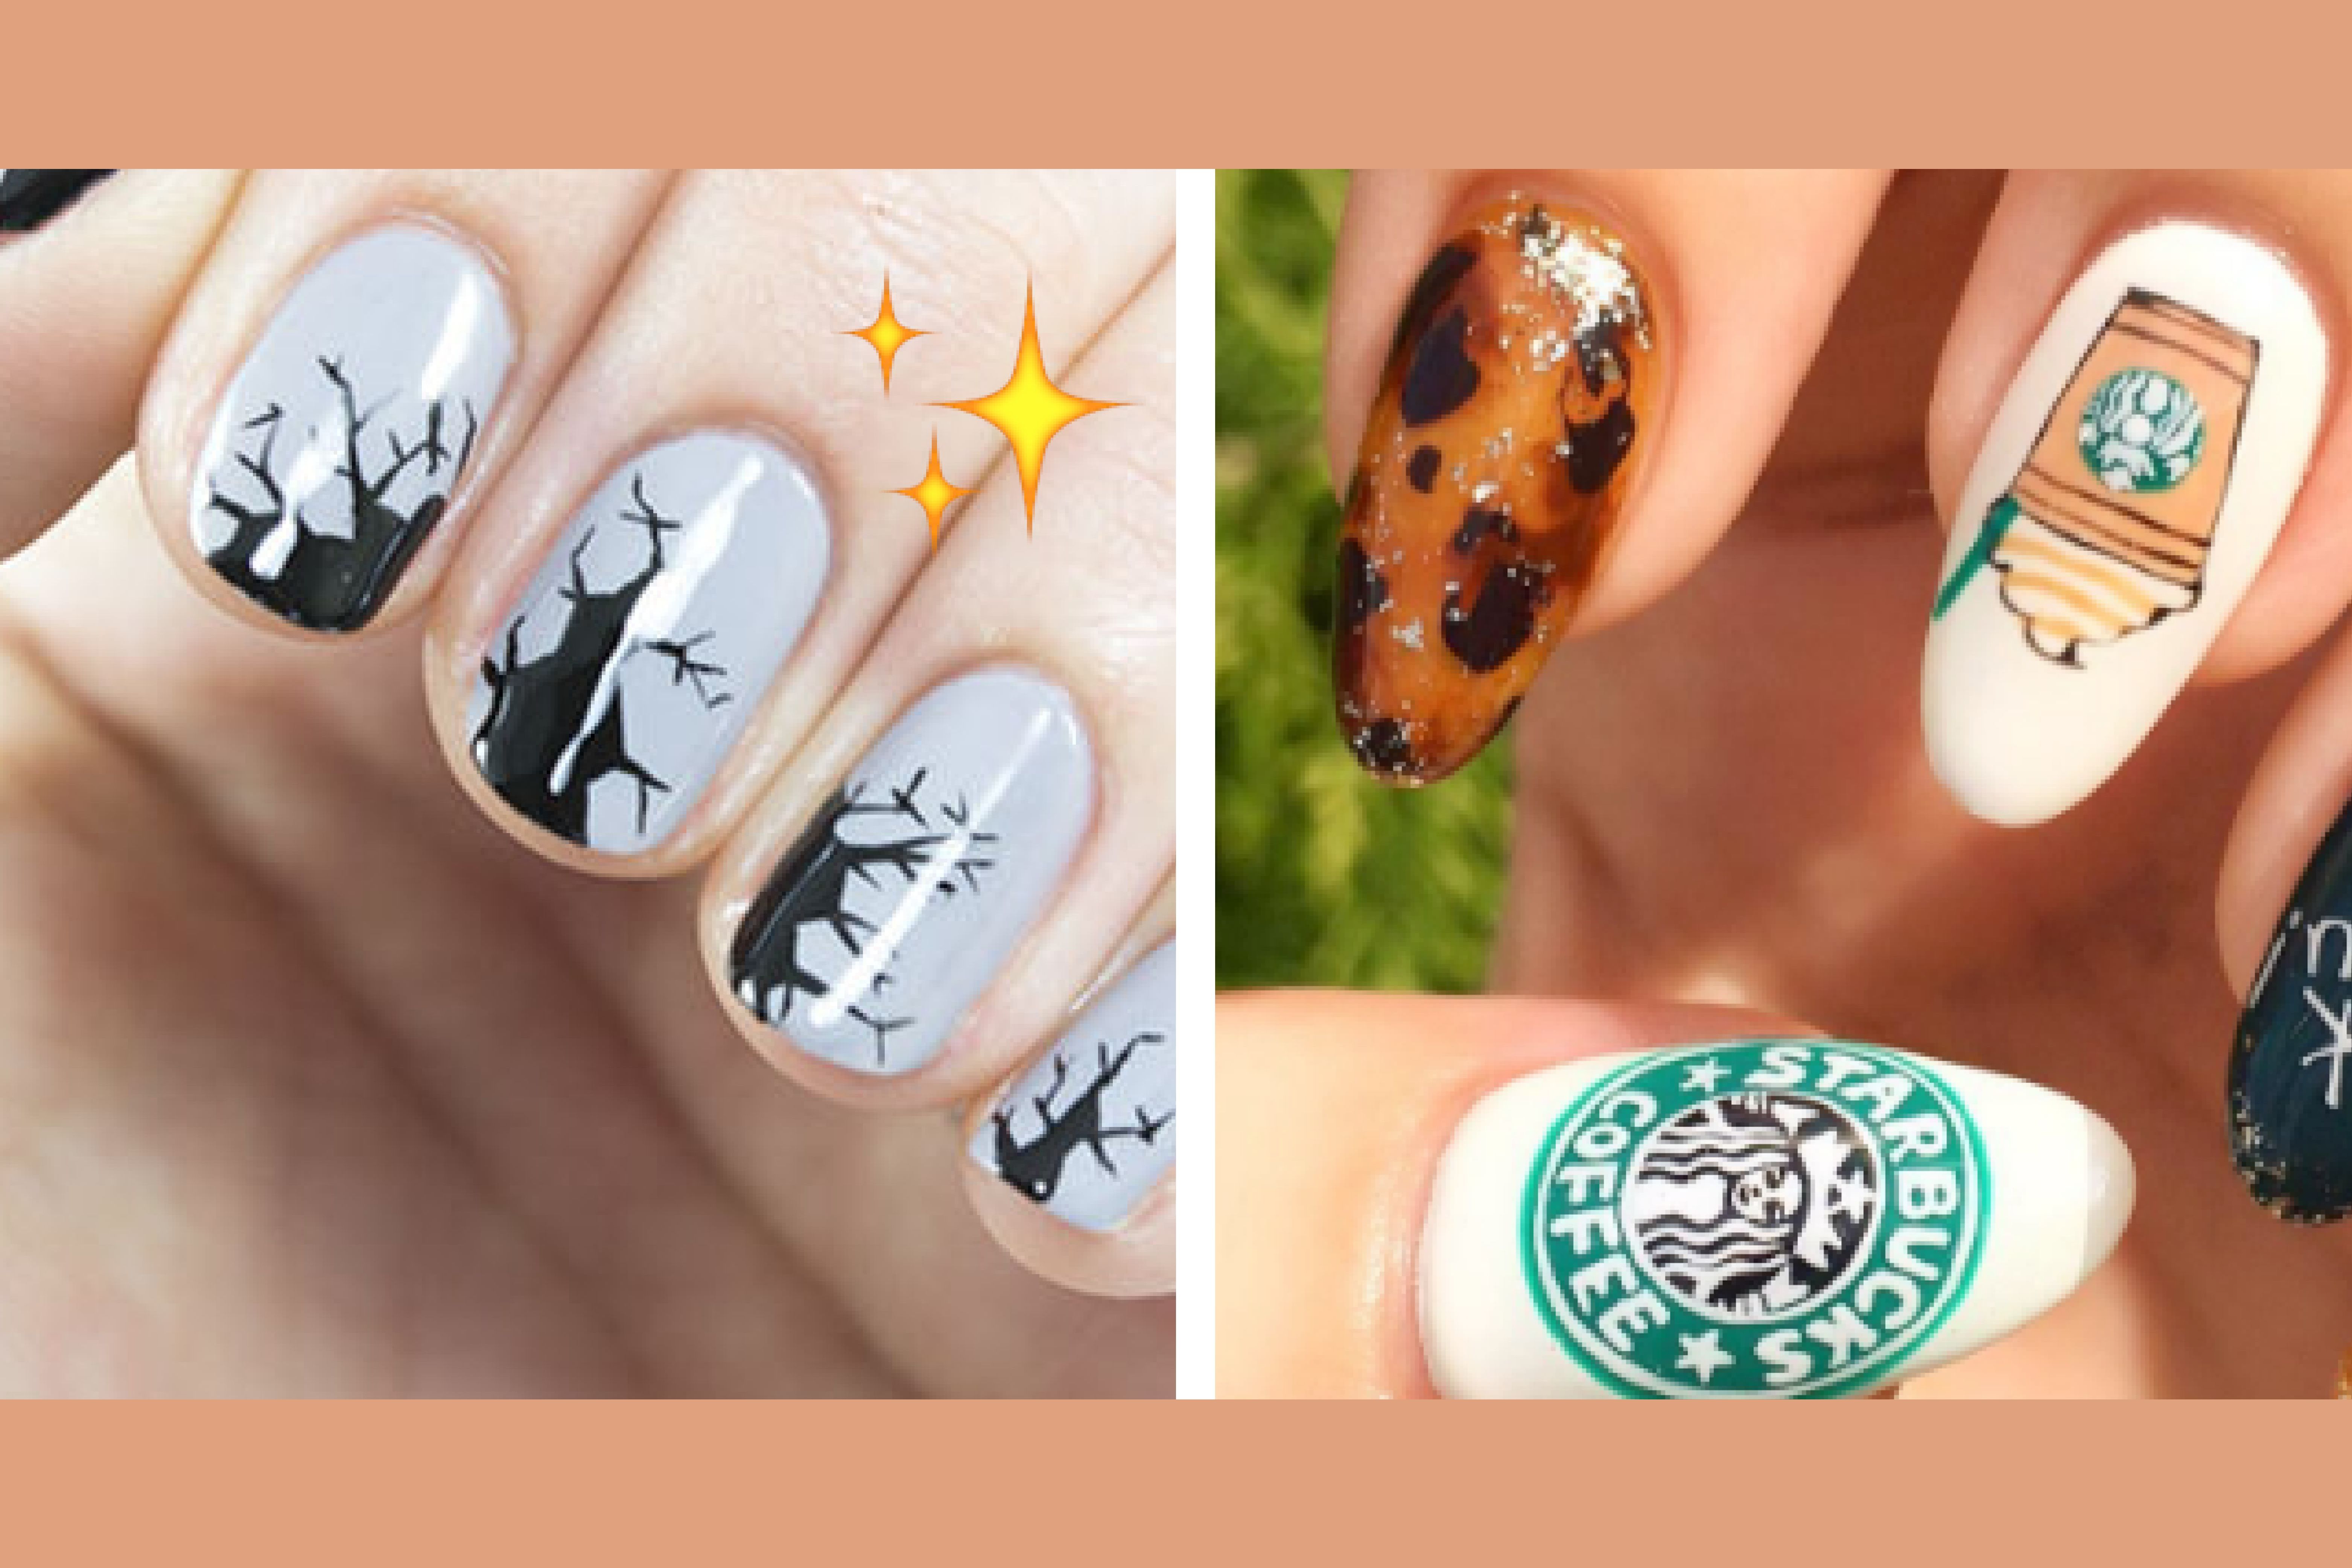 QUIZ: Based On Your Personality, What Nails Should You Try This Autumn?